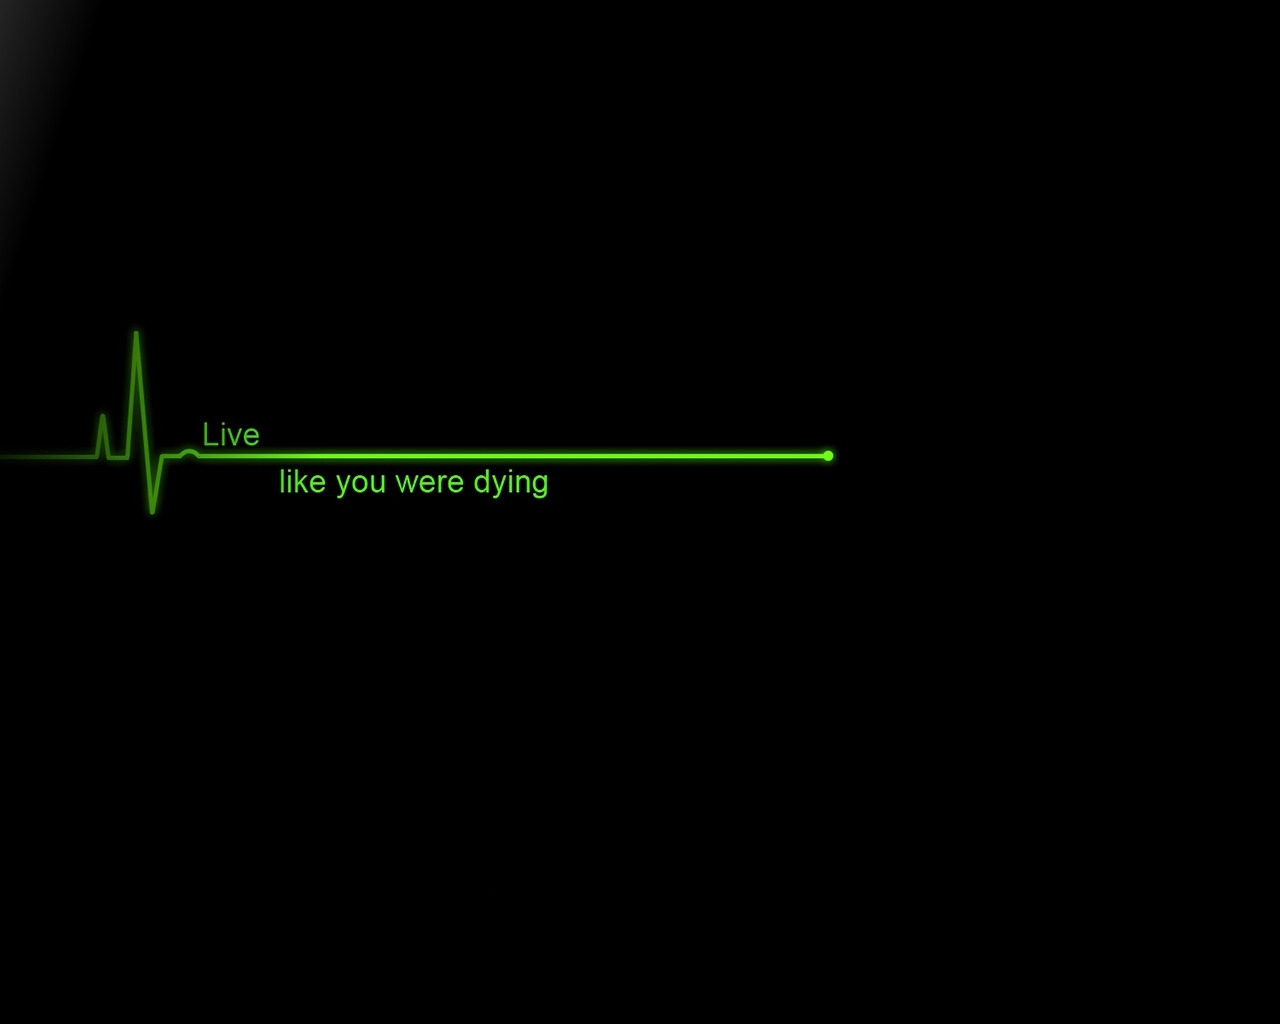 Live like you were dying for 1280 x 1024 resolution